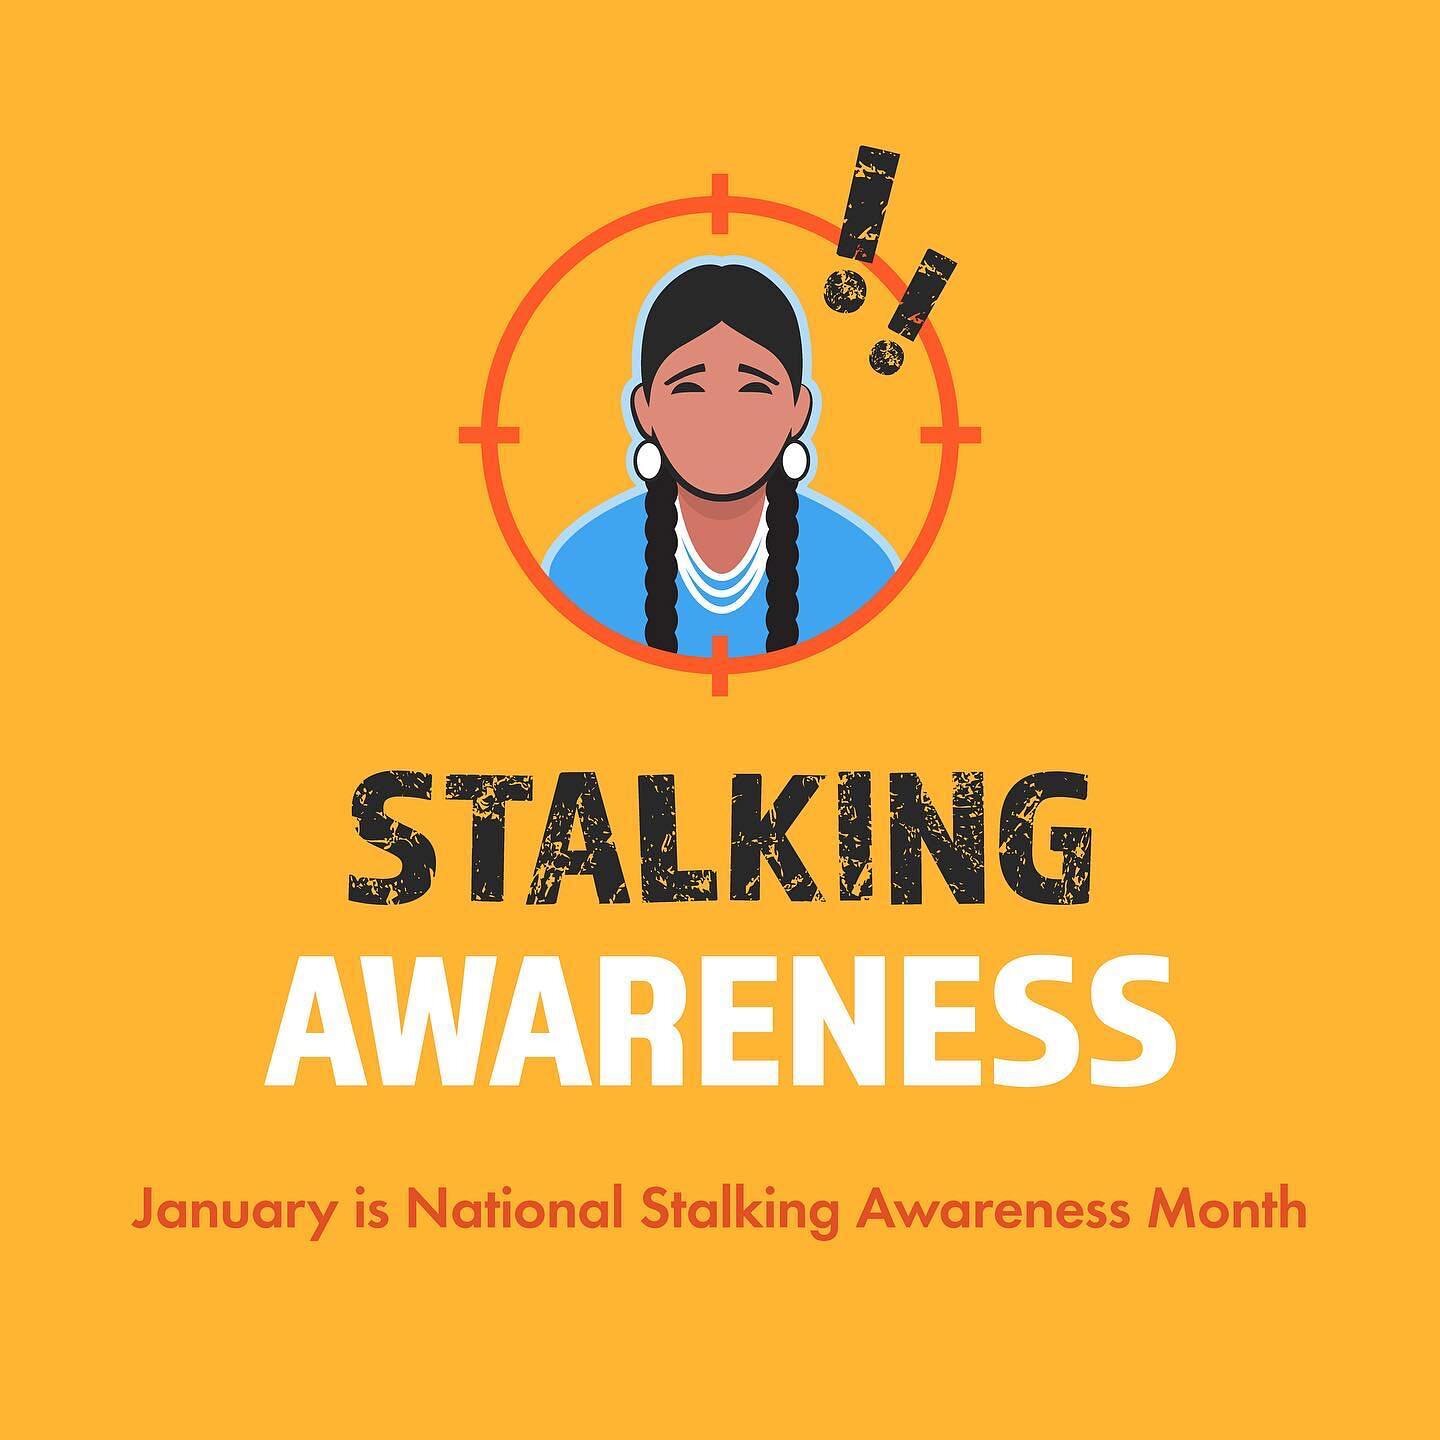 Did you know that the most common perpetrators of stalking crimes were current or former intimate partners and acquaintances during the victim&rsquo;s lifetime? All stalking cases are serious and dangerous. If you or someone you know believes you are